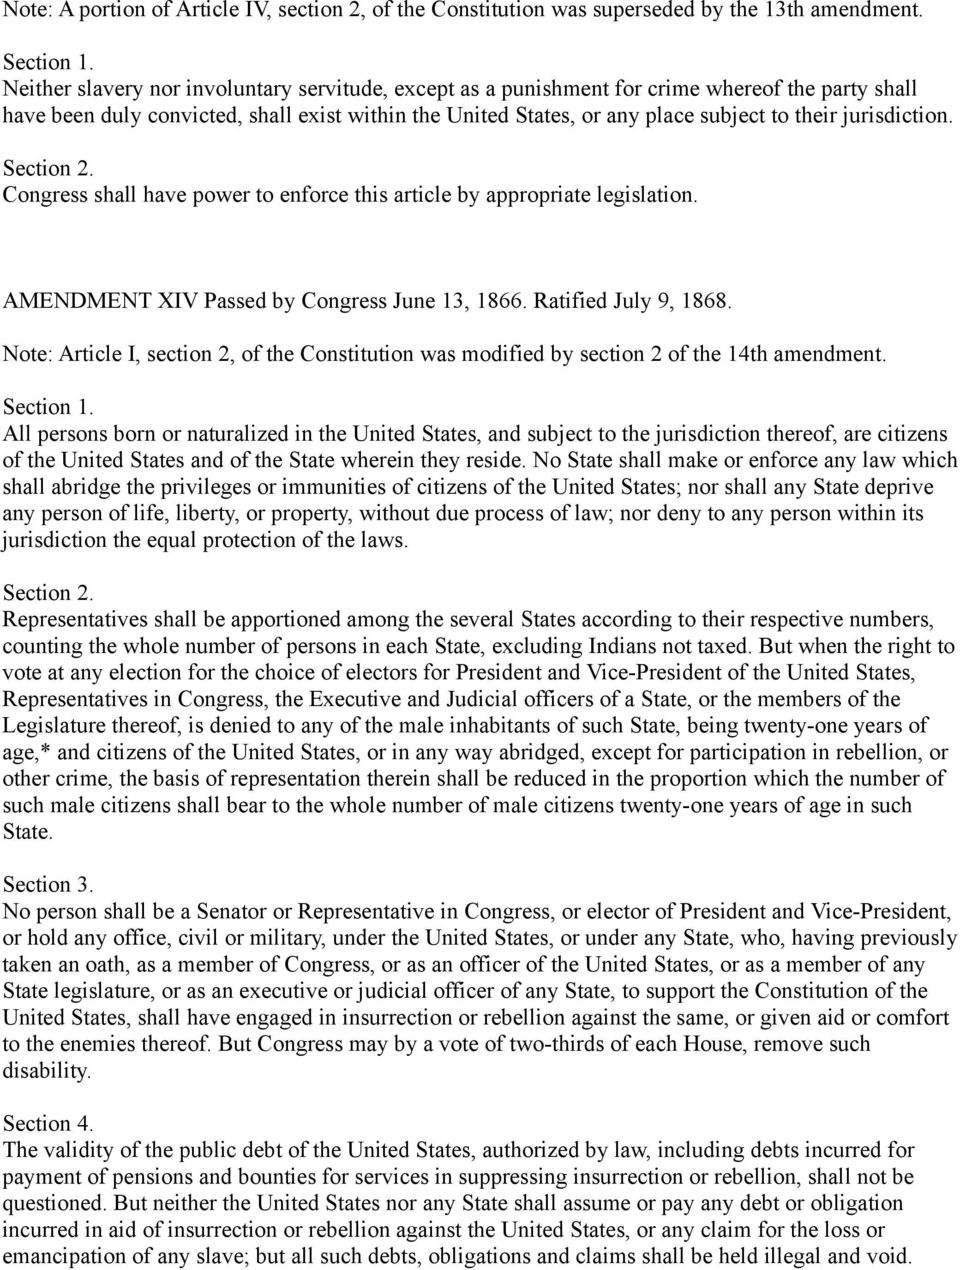 jurisdiction. Congress shall have power to enforce this article by appropriate legislation. AMENDMENT XIV Passed by Congress June 13, 1866. Ratified July 9, 1868.